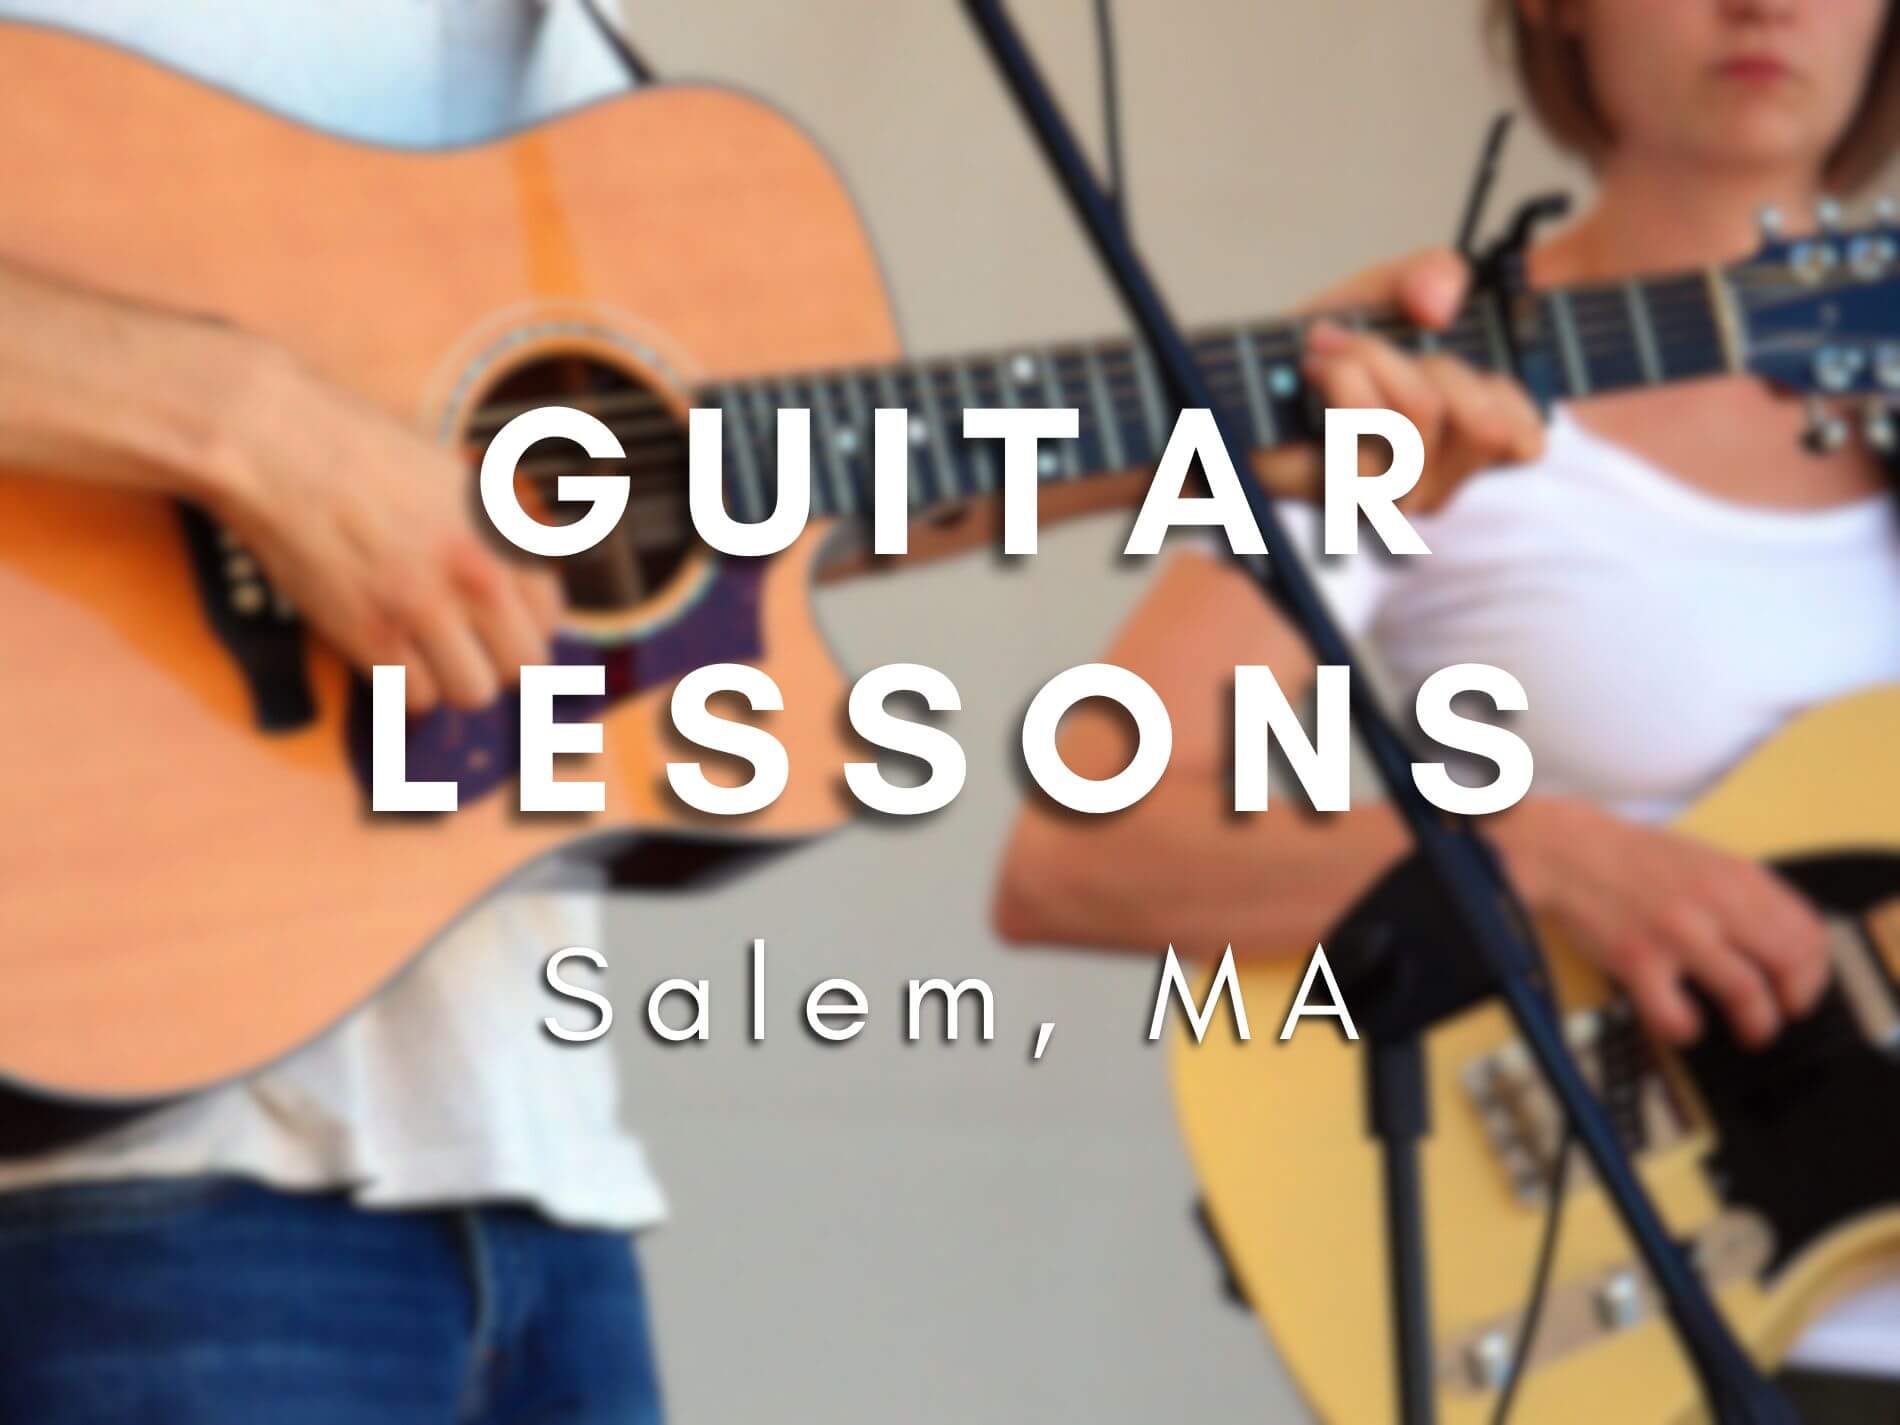 Guitar Lessons in Salem, Massachusetts: Learn to Play Guitar with Expert Instruction